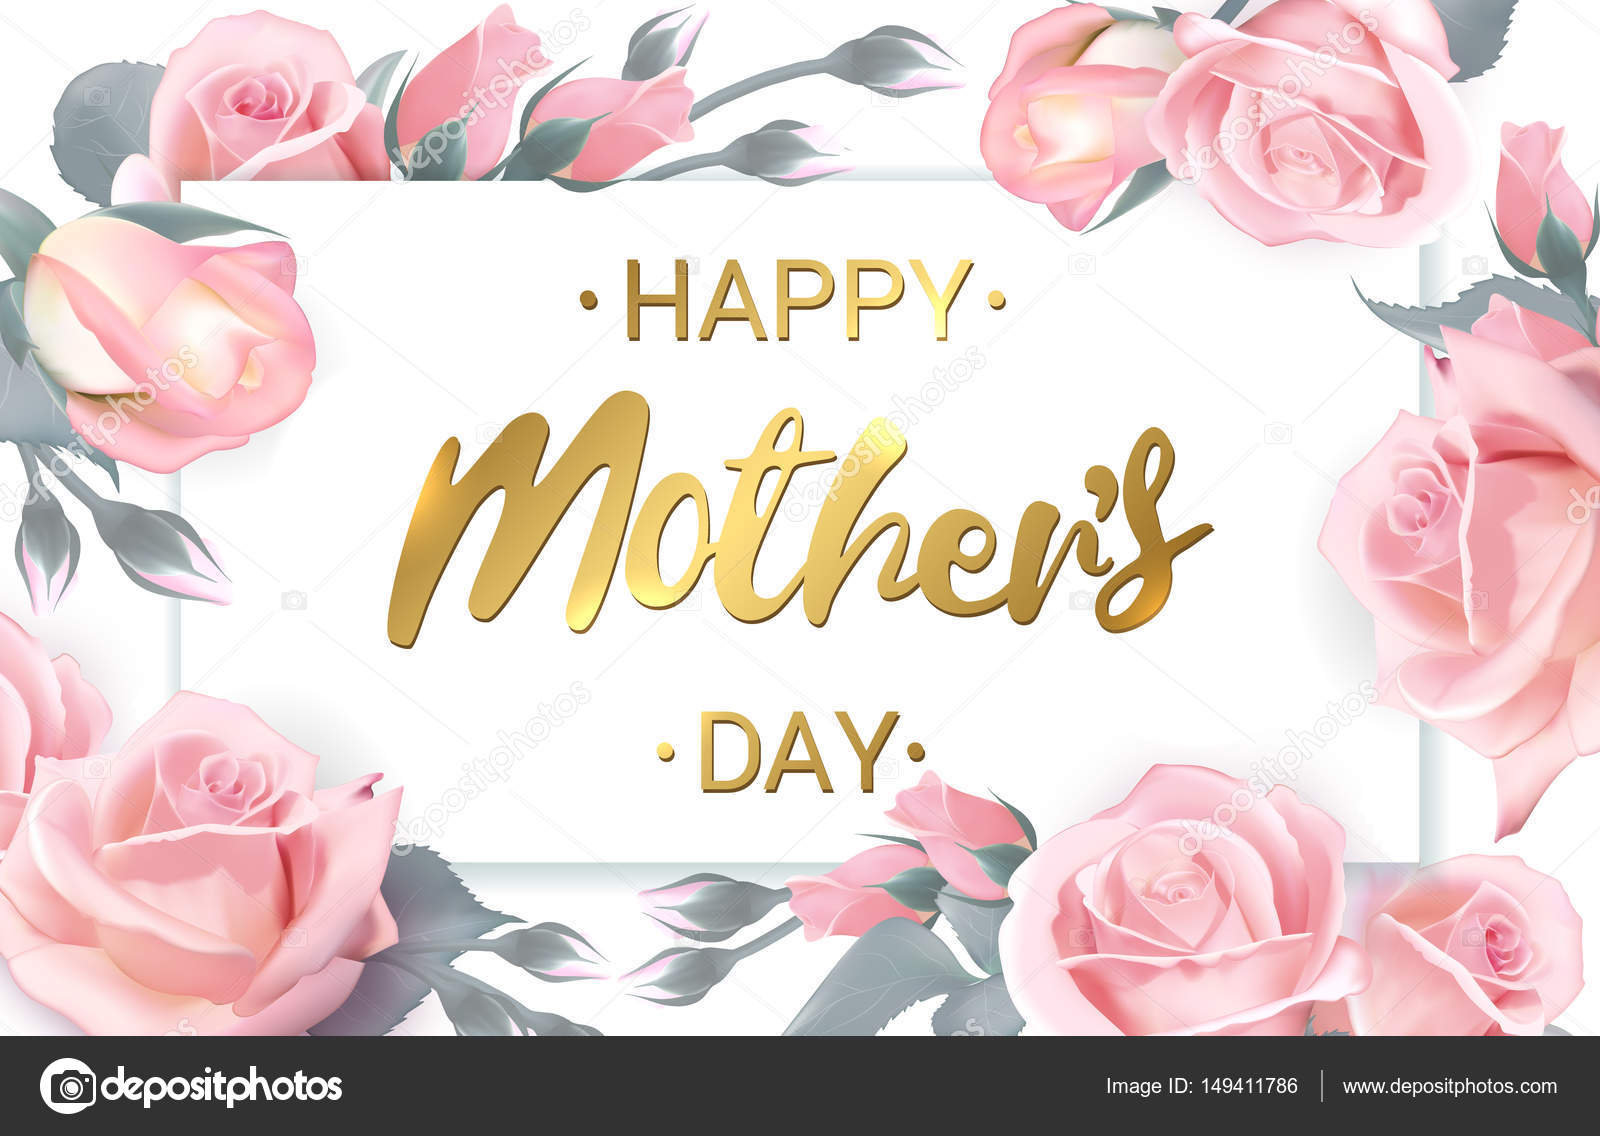 Mothers Day themed card Happy Mothers Day Rose Card Happy Mothers Day Rose Card Mothers Day Theme Card